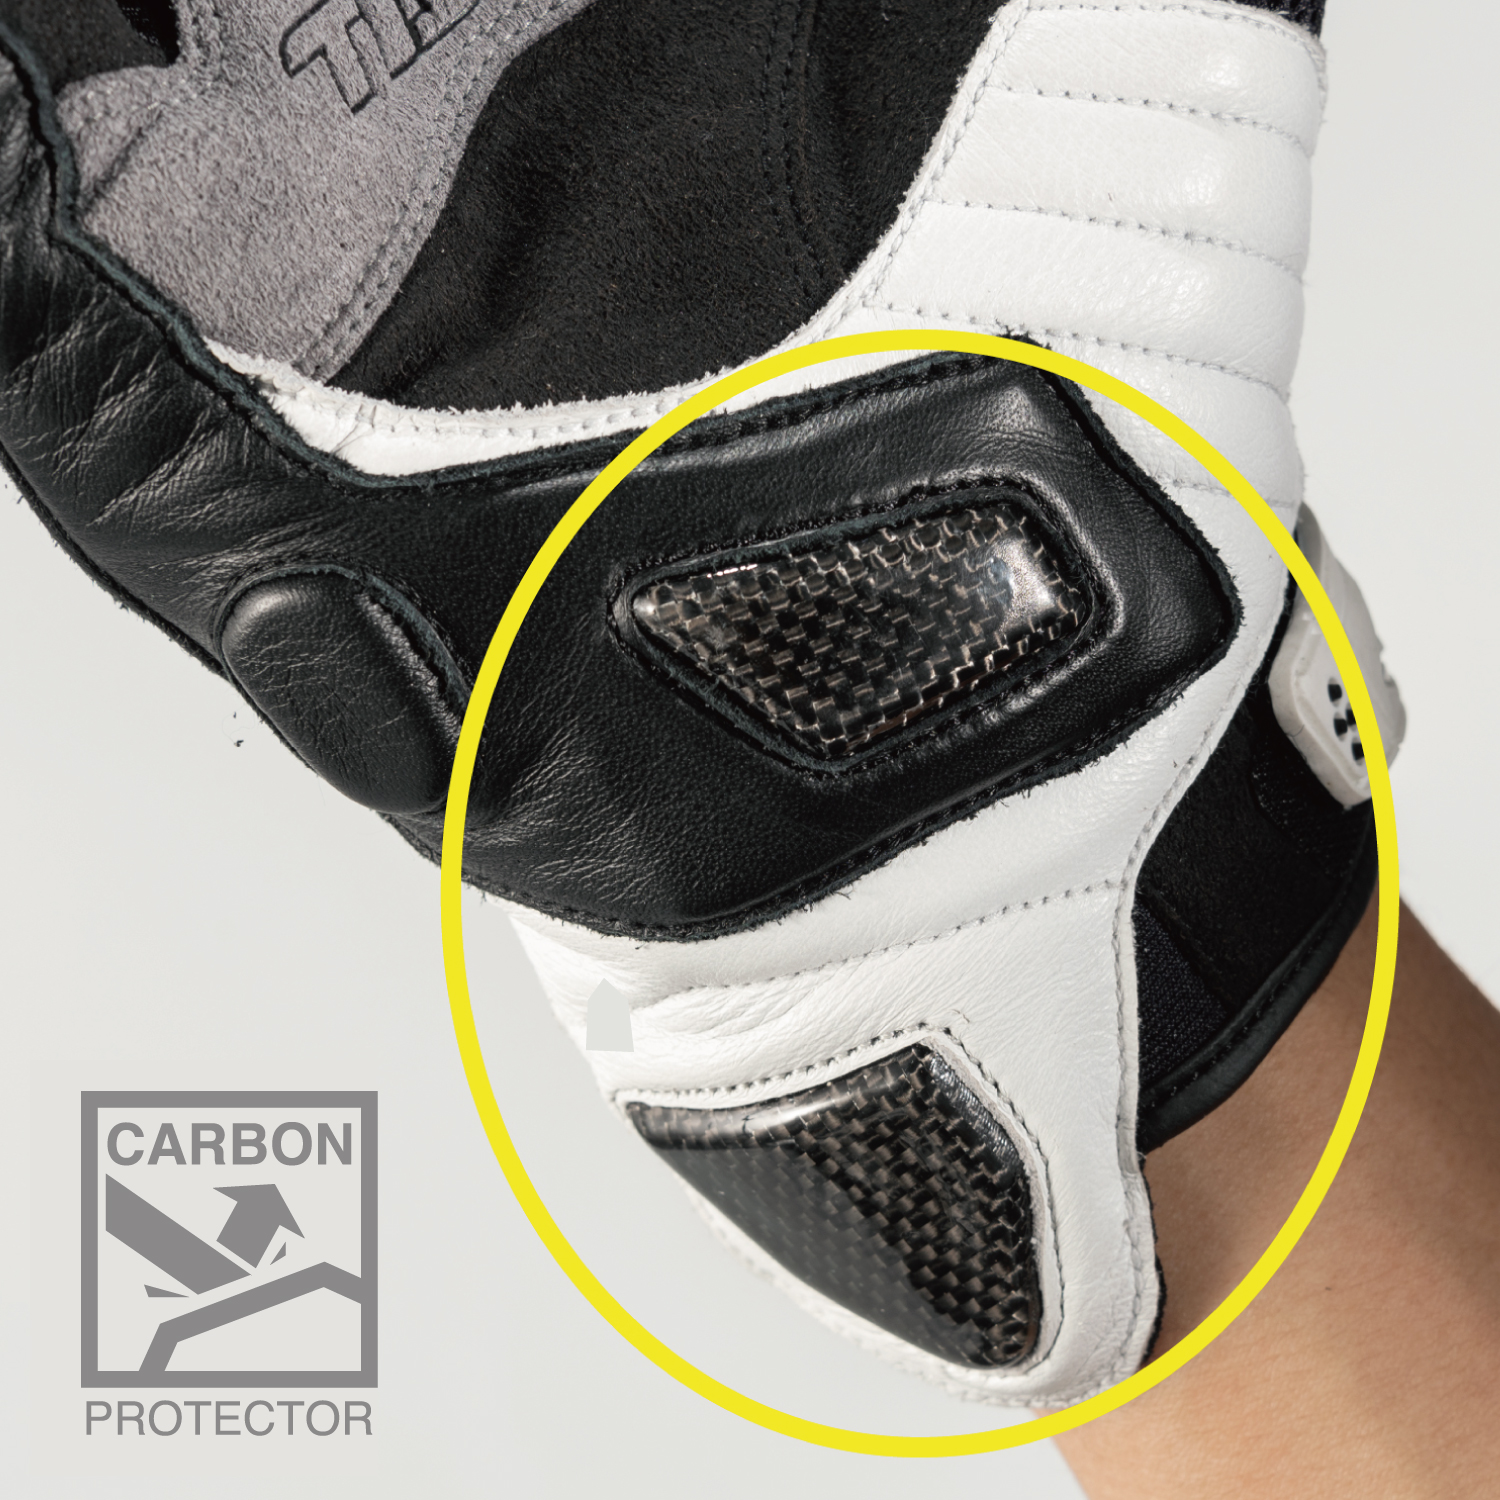 Carbon material is used for the palm and wrist protectors.